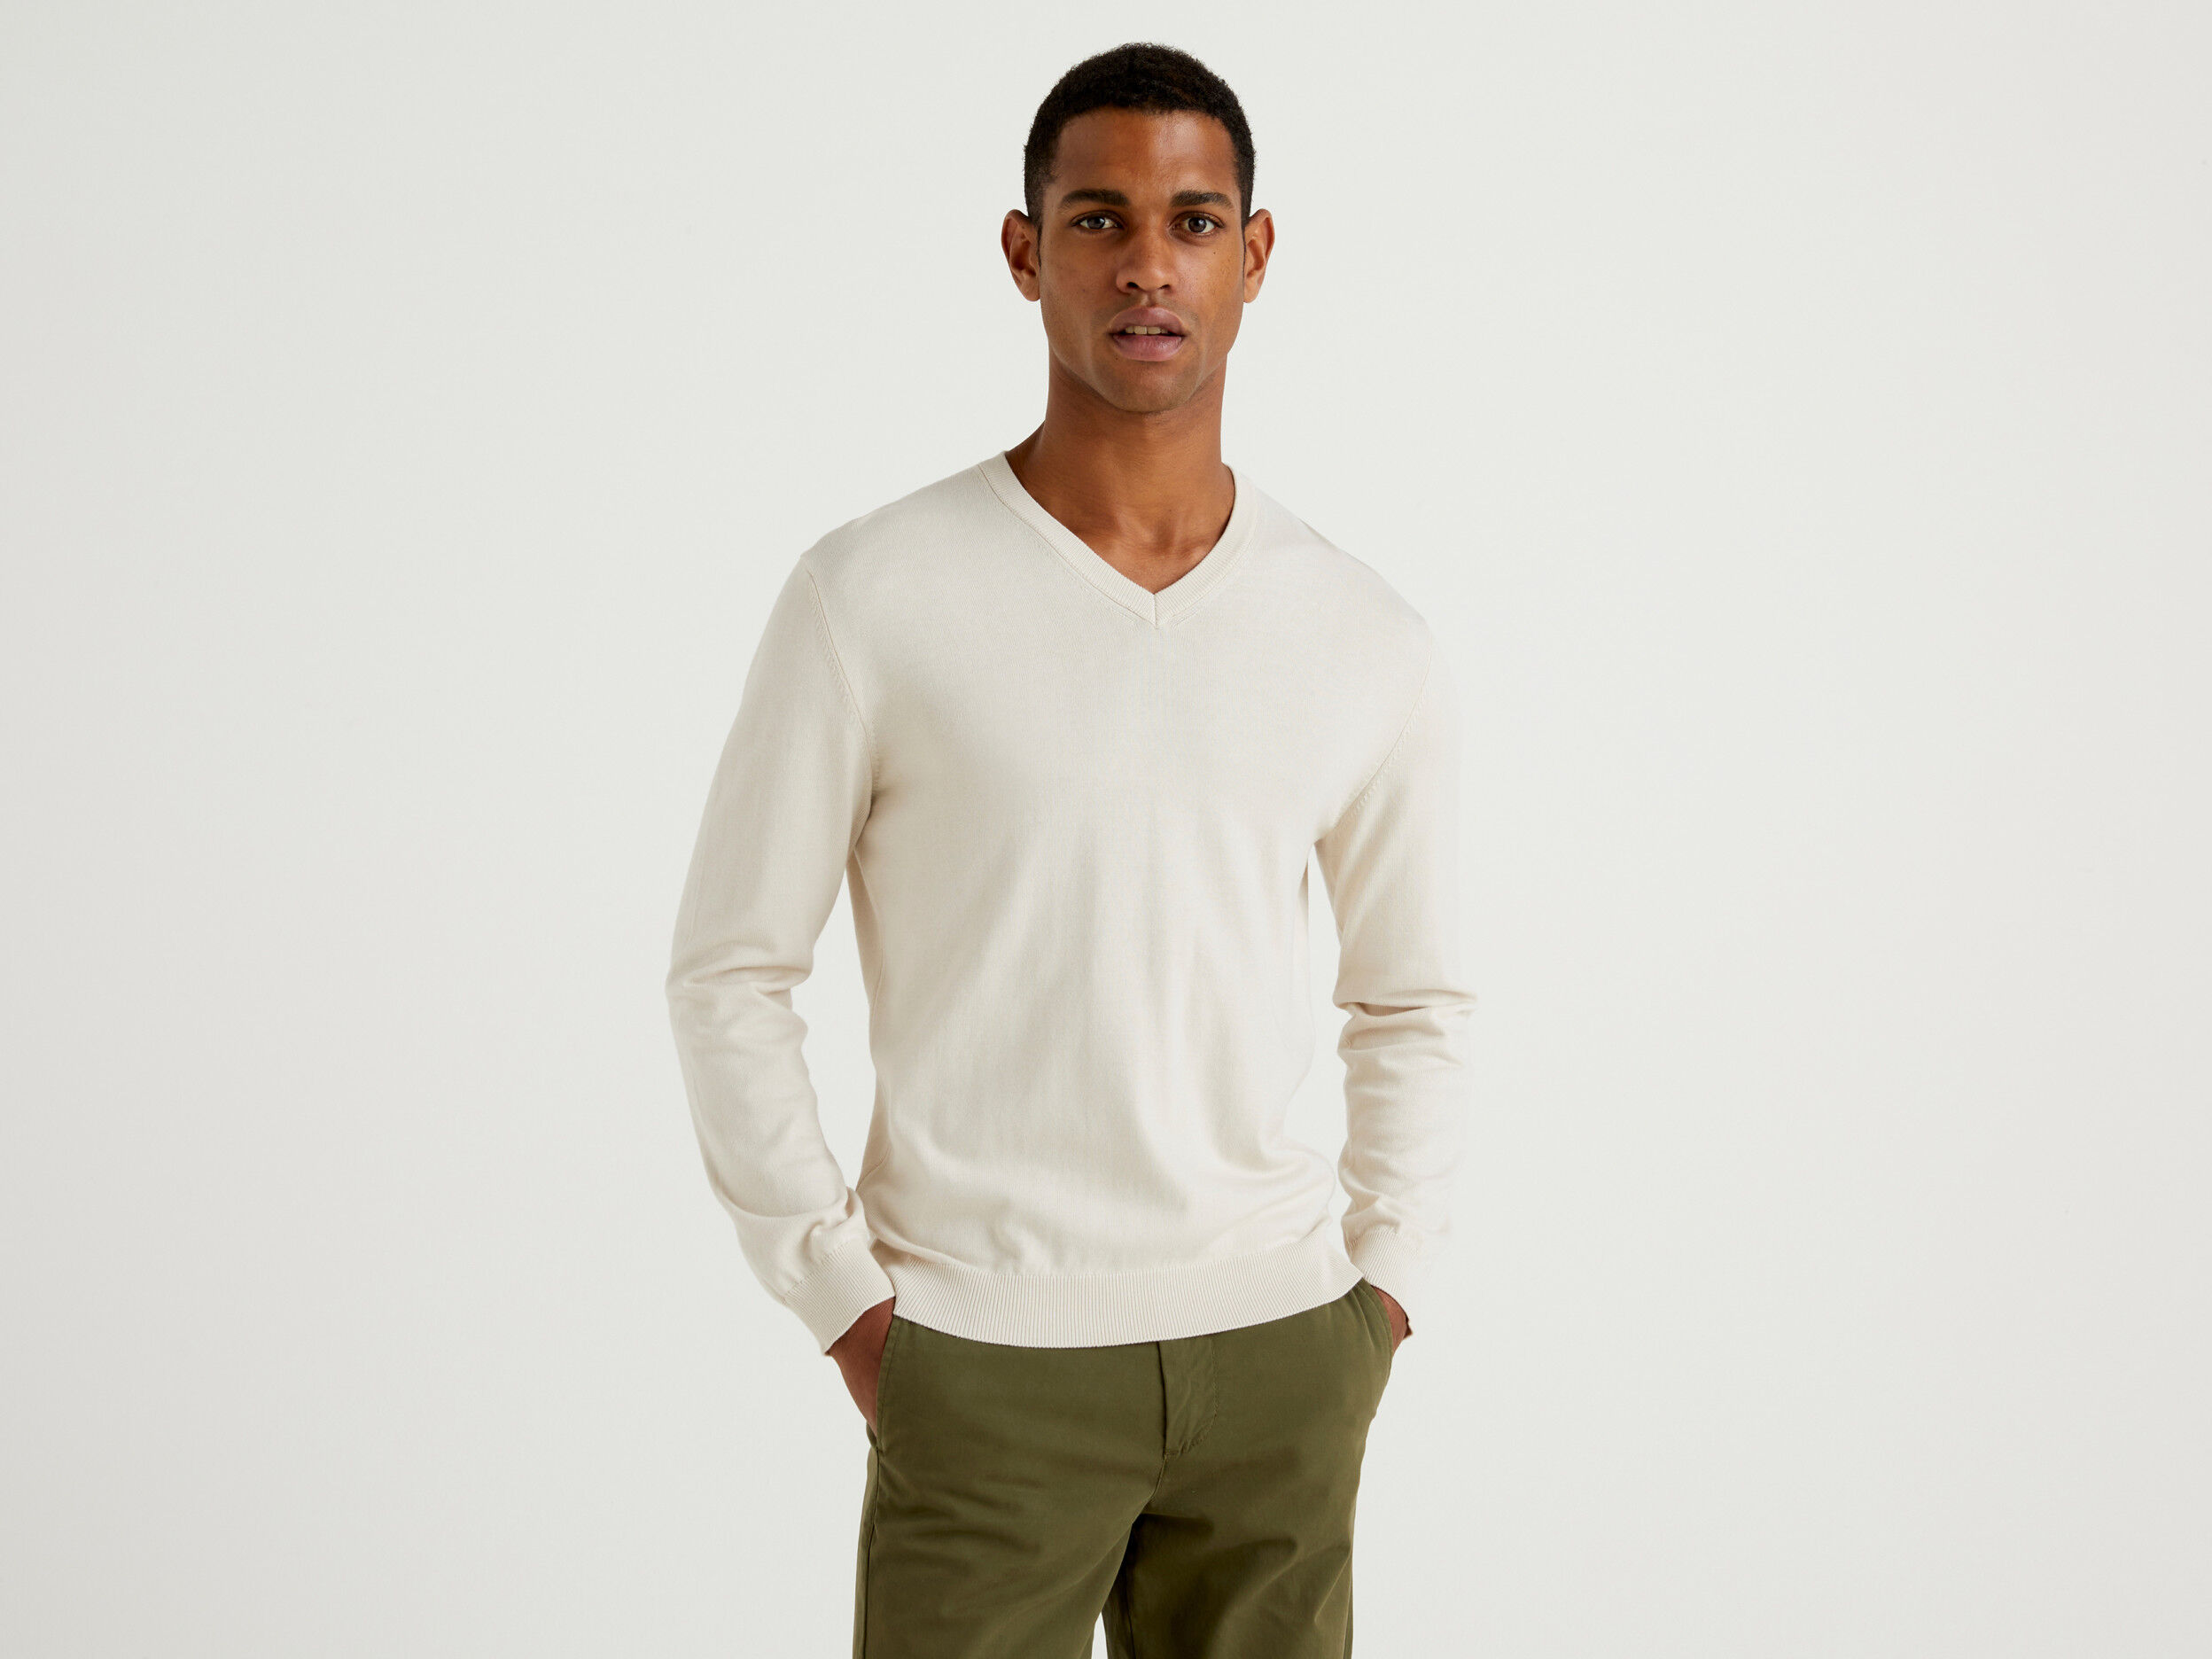 Pure cotton sweater with V-neck